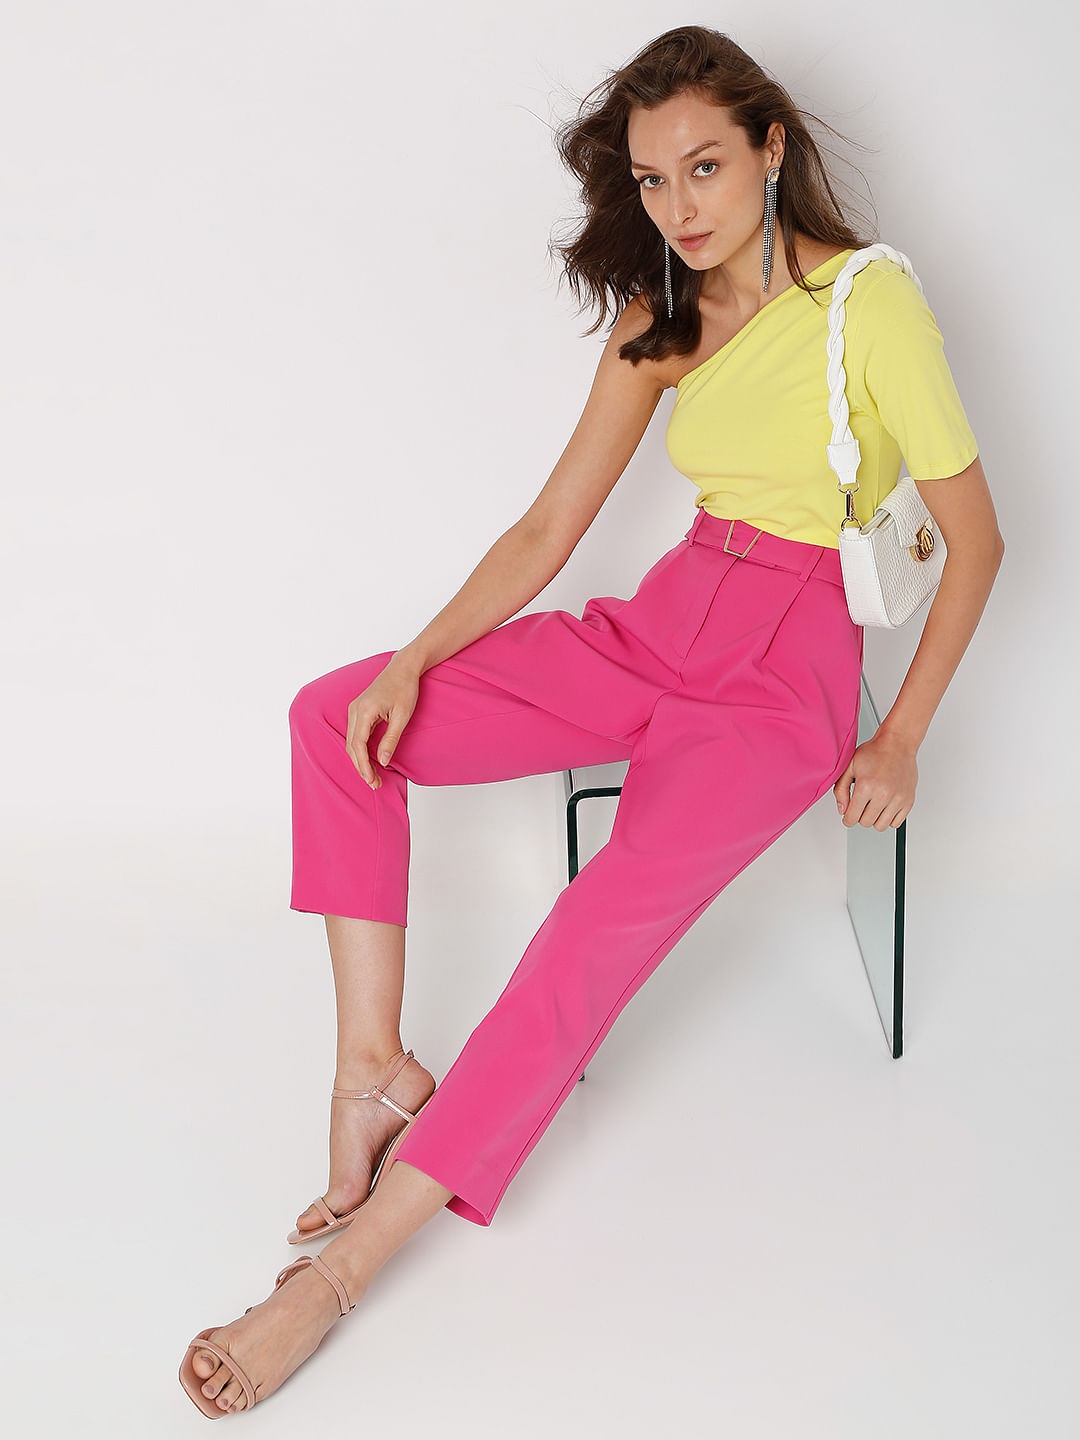 Hot Pink Women's Stretch Business Casual High Waisted Work Office Wide –  Lookbook Store